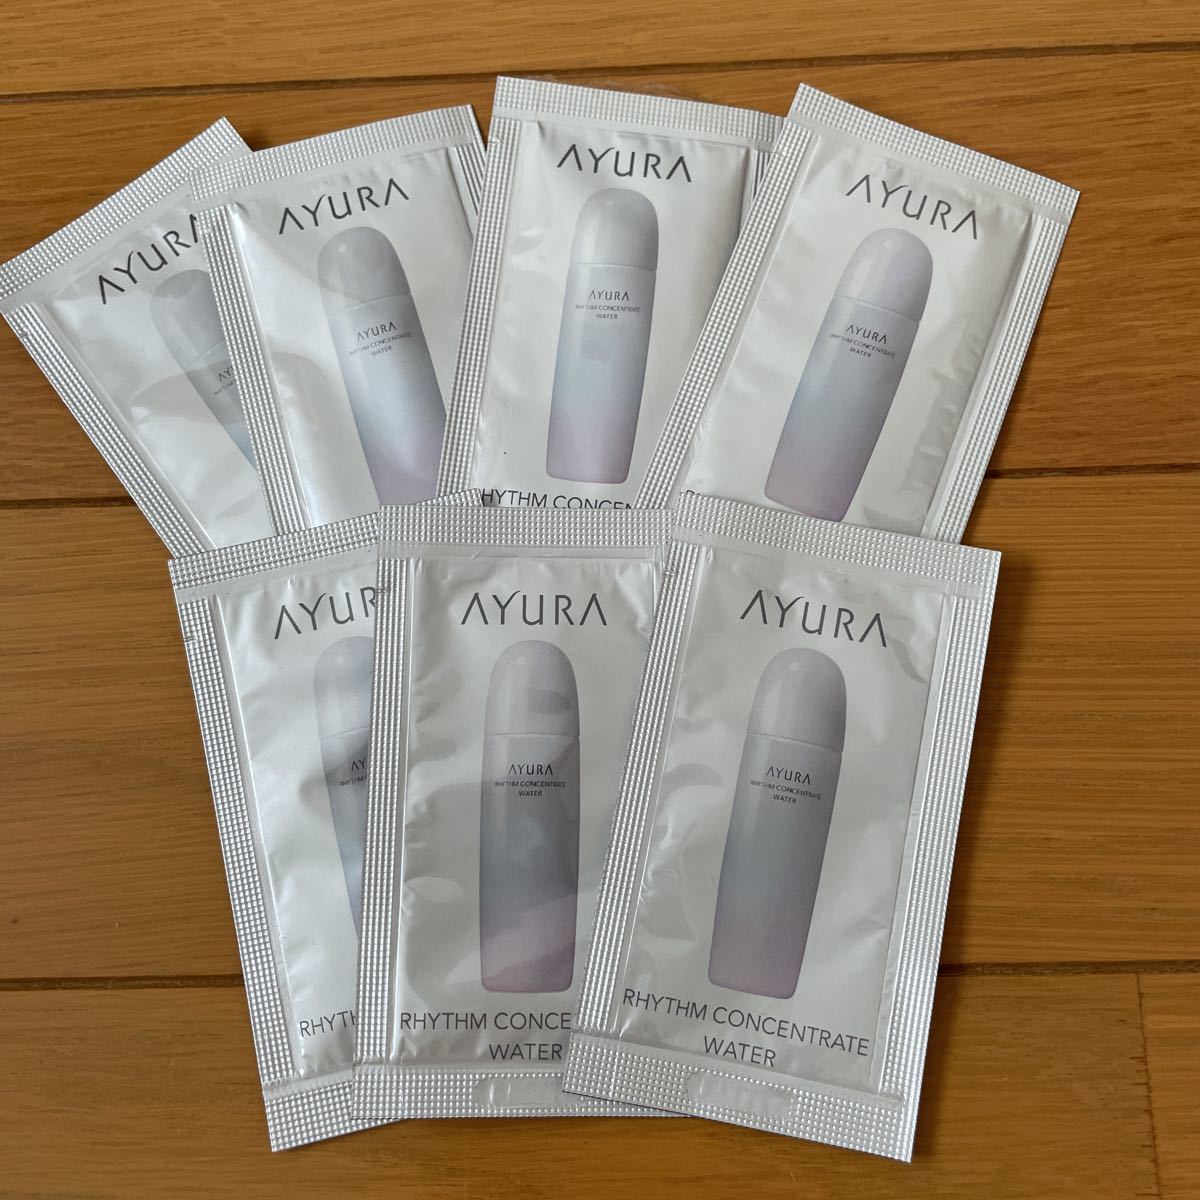  Ayura * rhythm outlet rate water *3ml×7